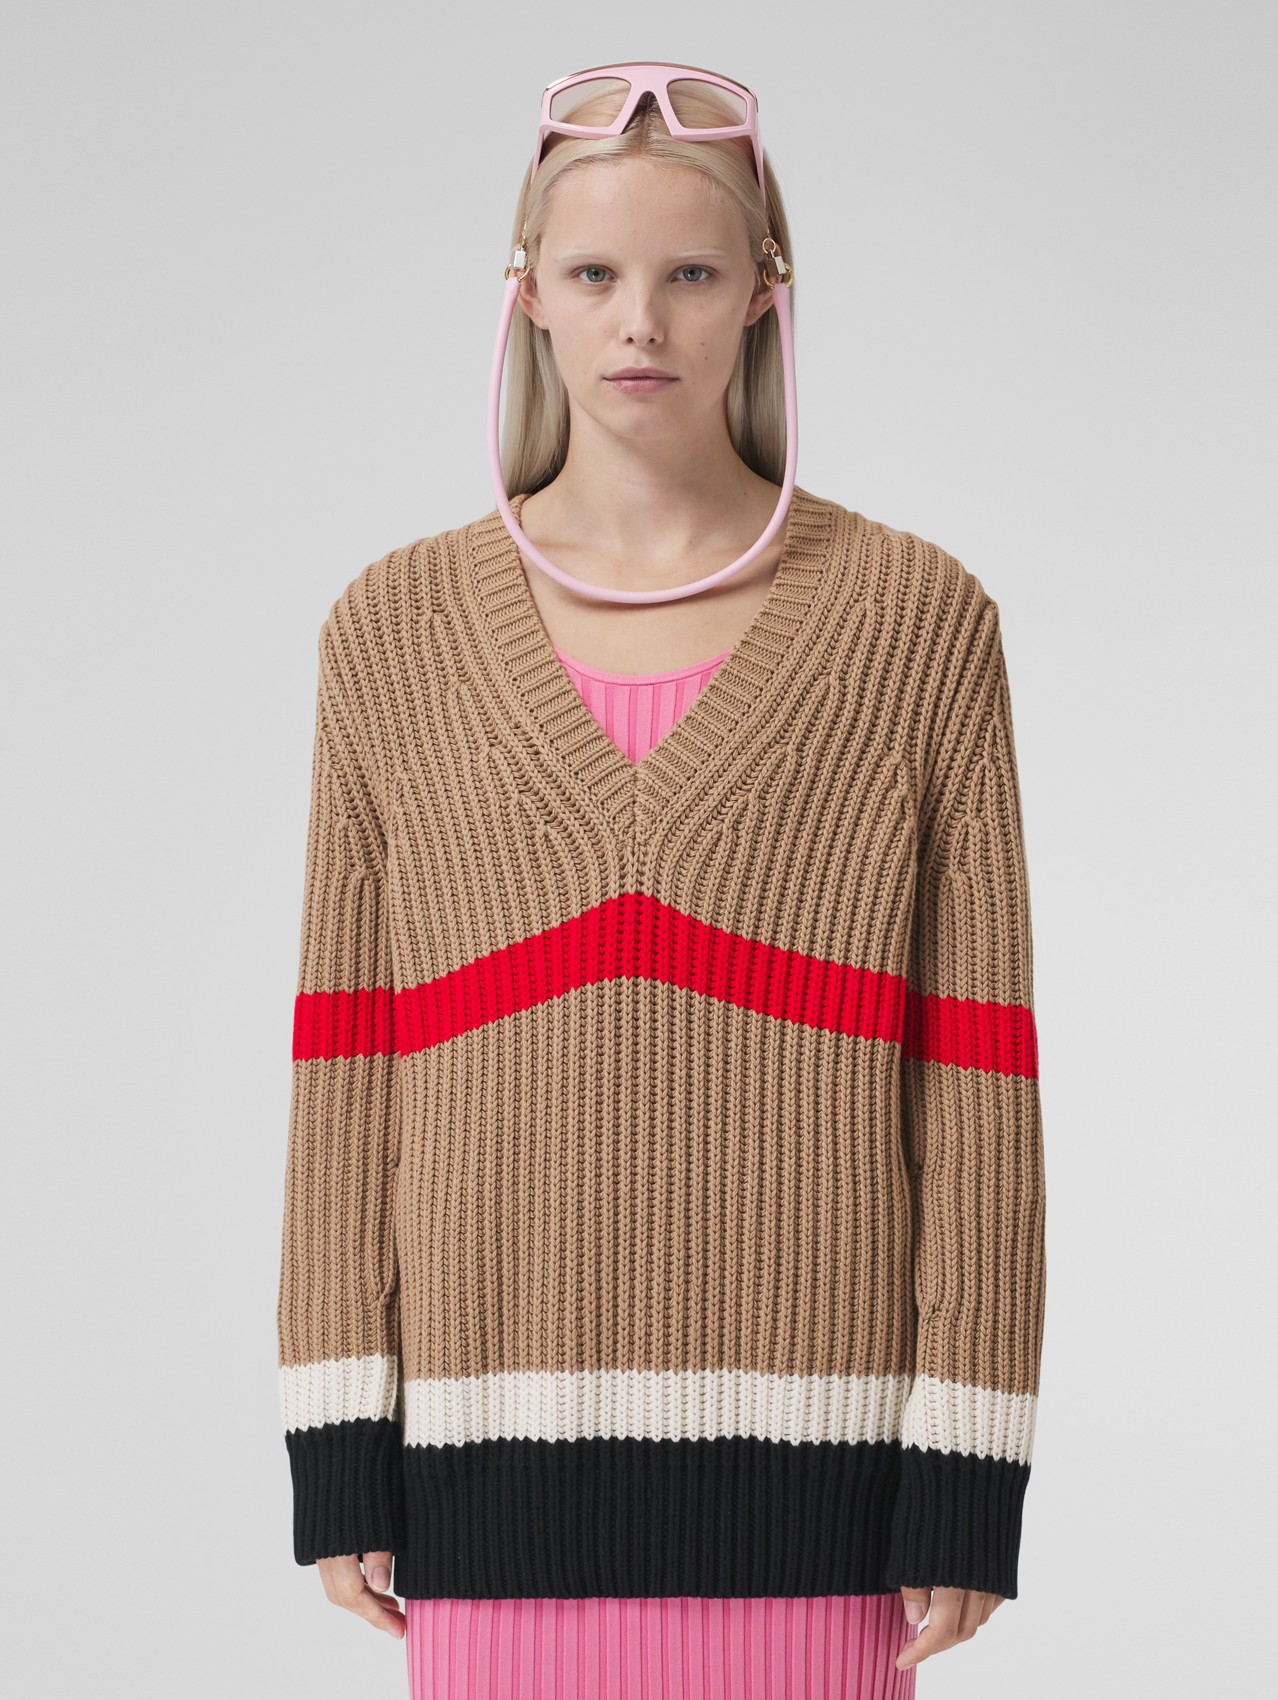 Striped Rib Knit Cashmere Cotton Oversized Sweater in Camel